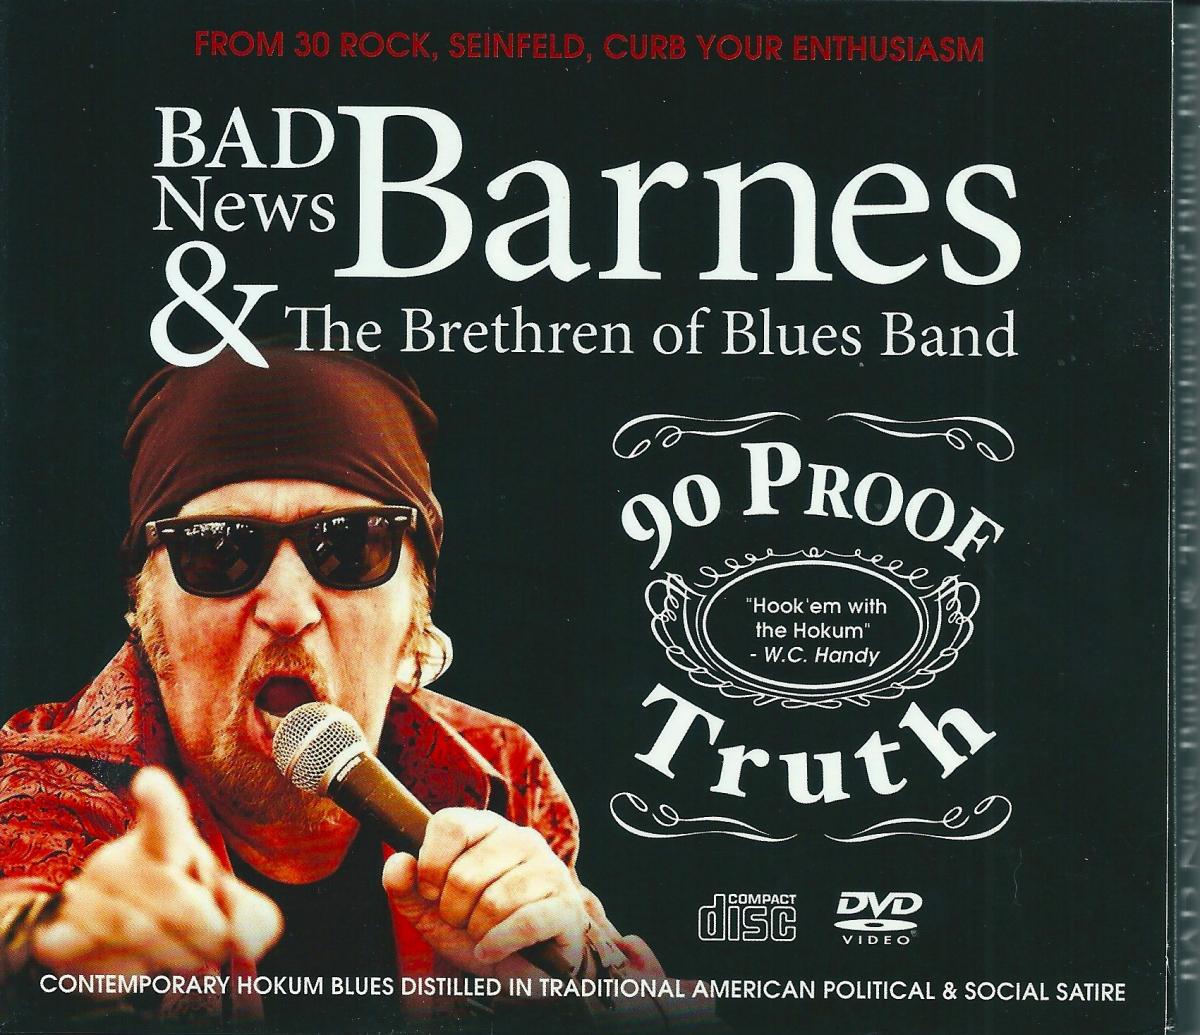 Bad News Barnes & The Brethern Of Blues Band: 90 Proof Truth 